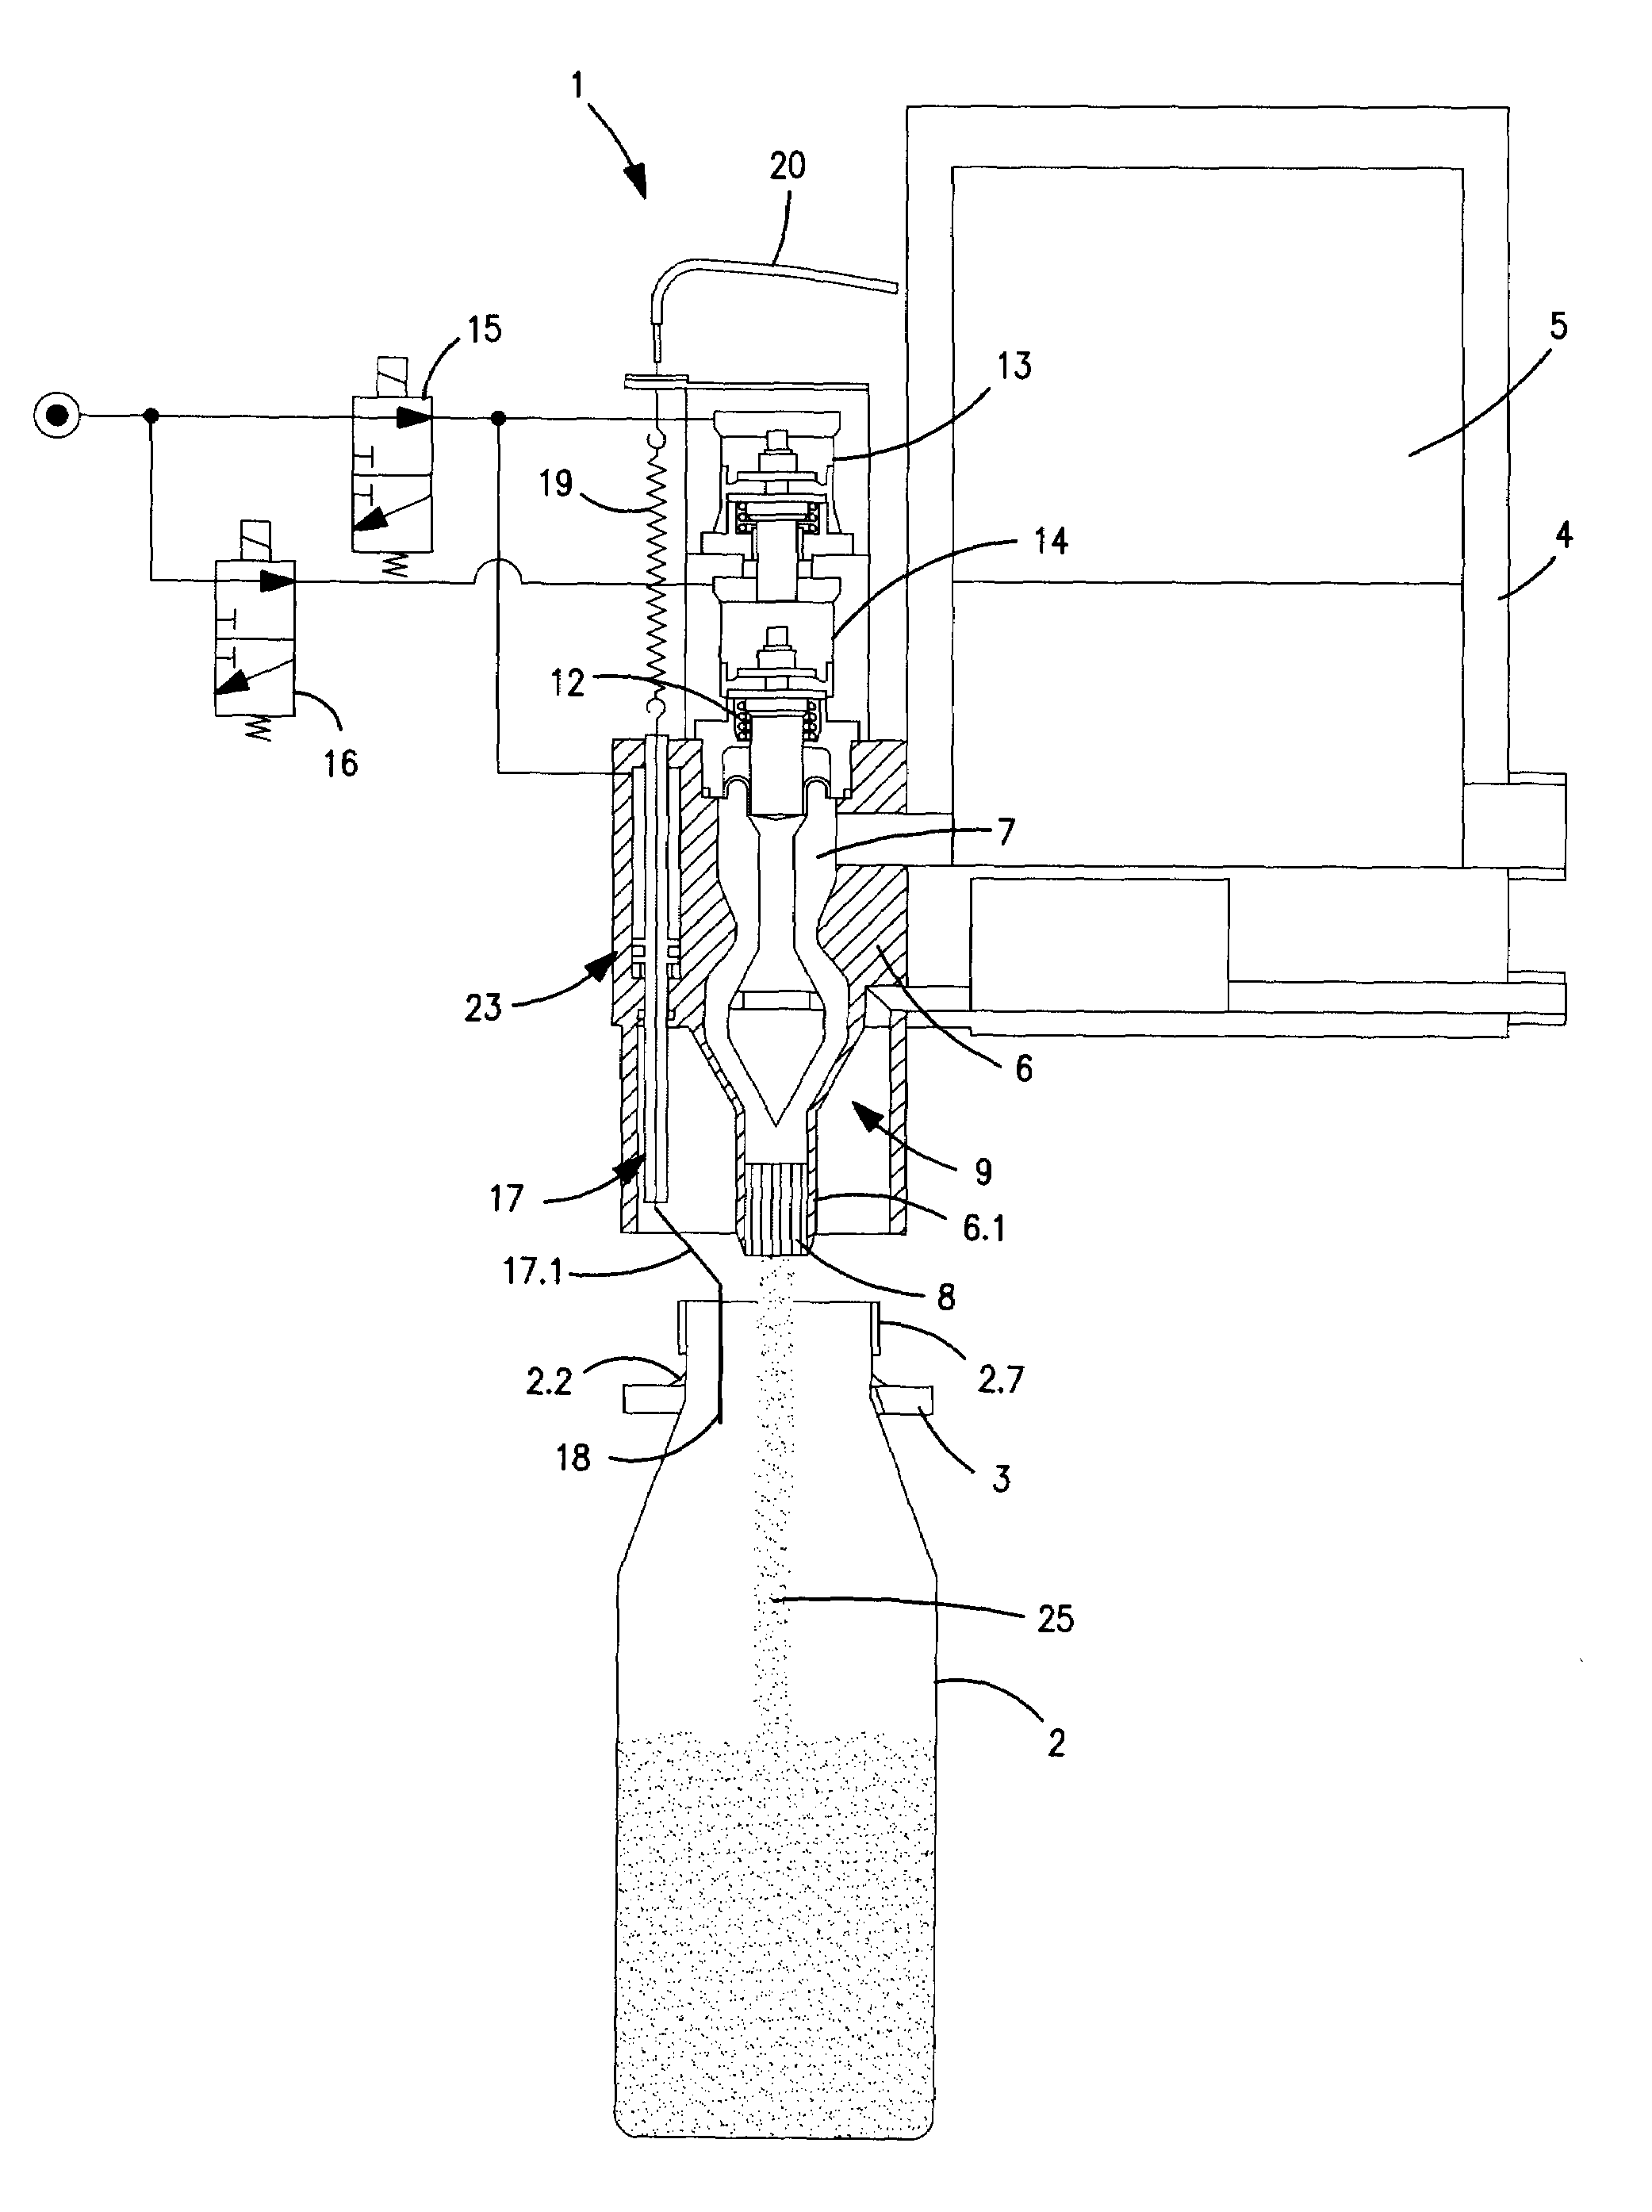 Container filling element for open-filling of containers